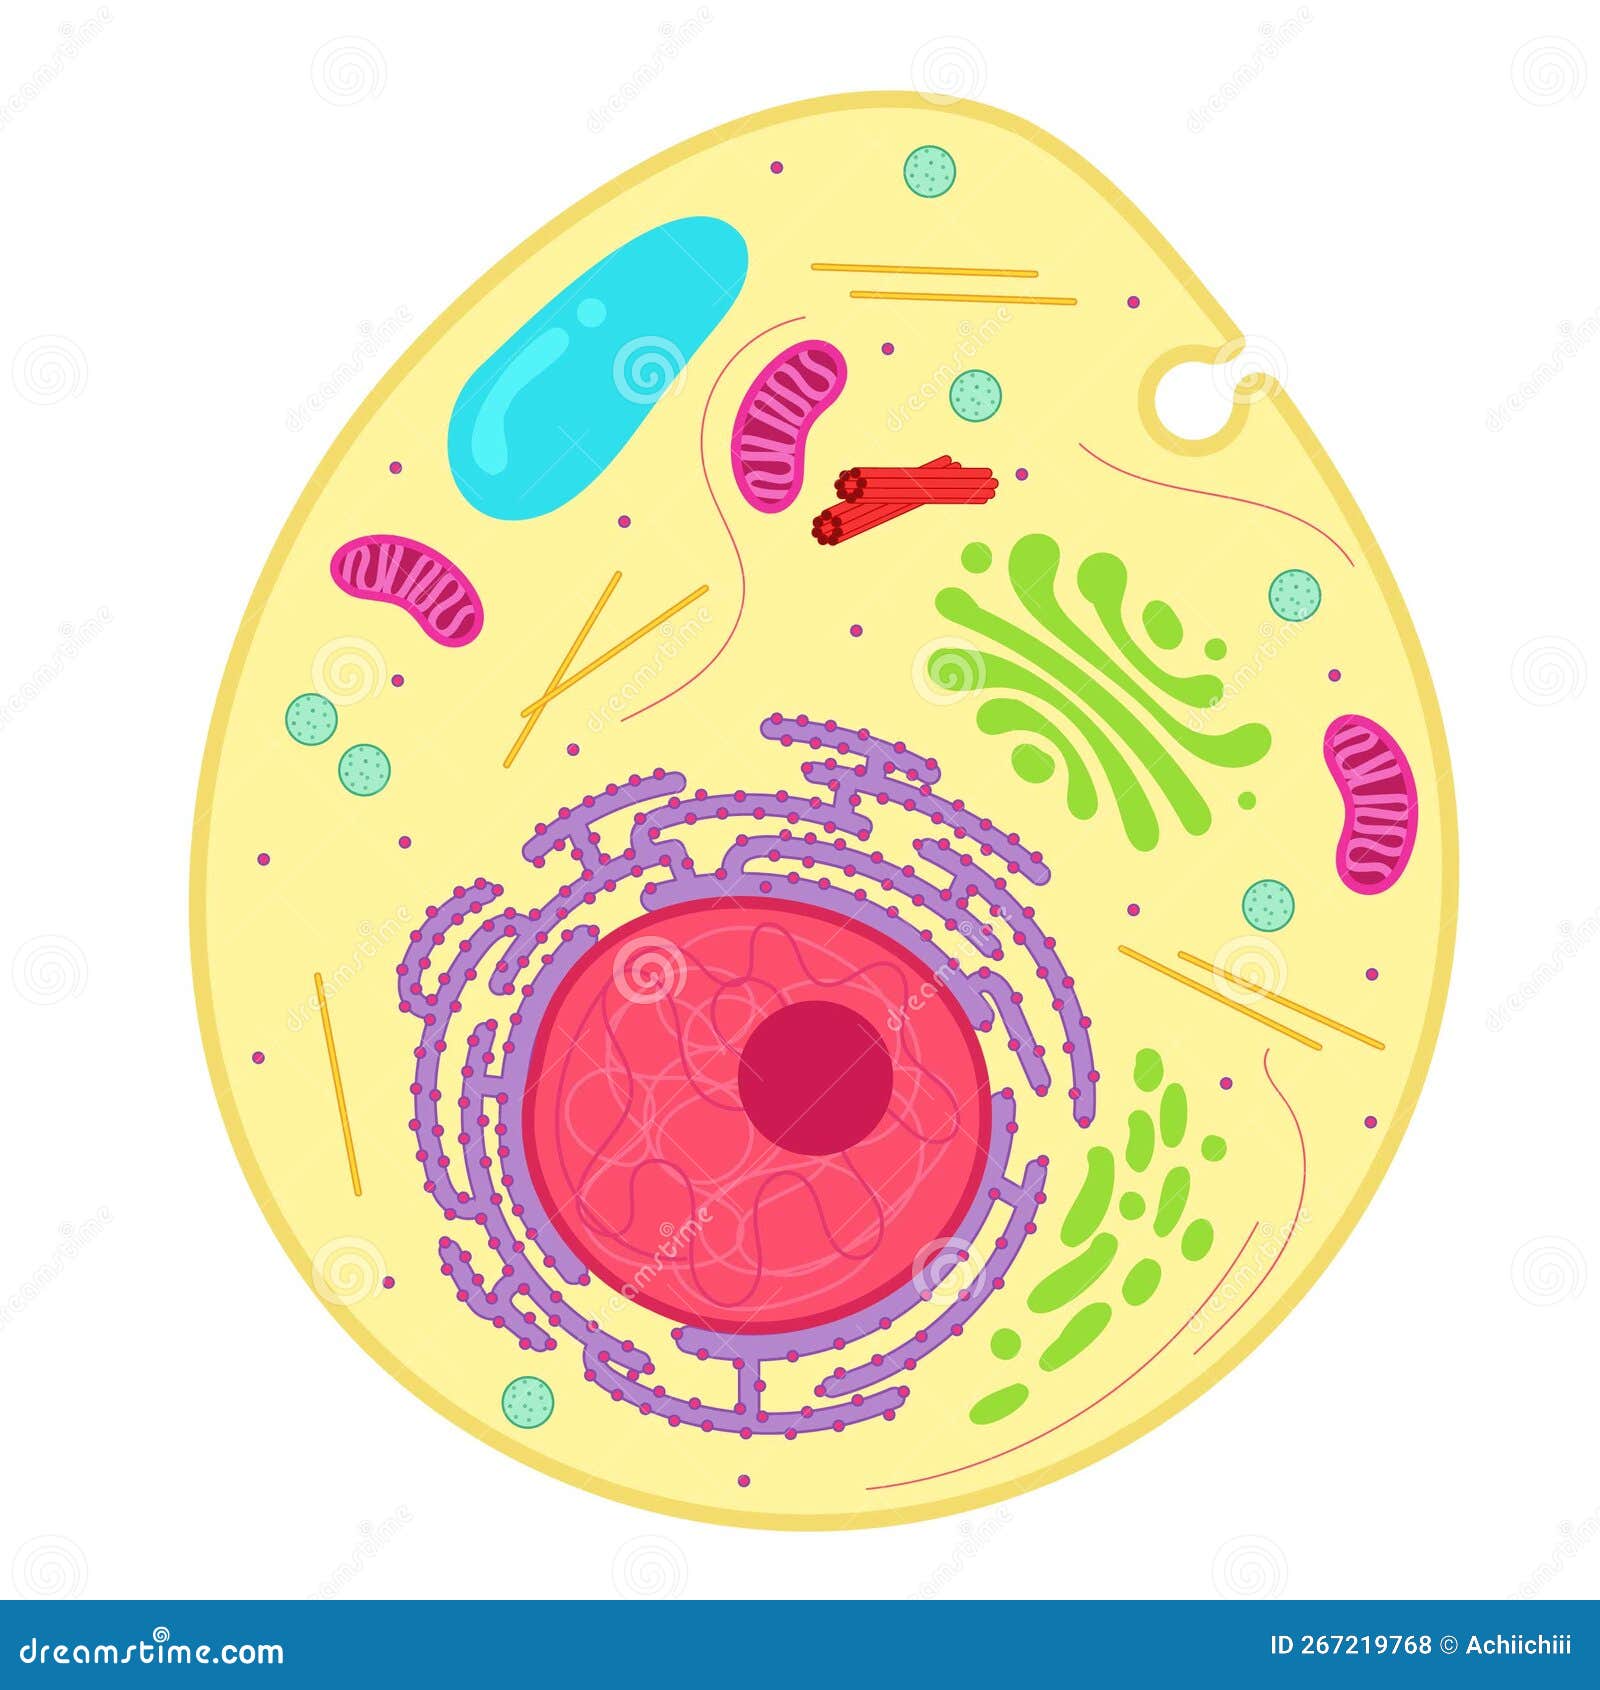 an animal cell is a type of eukaryotic cell.